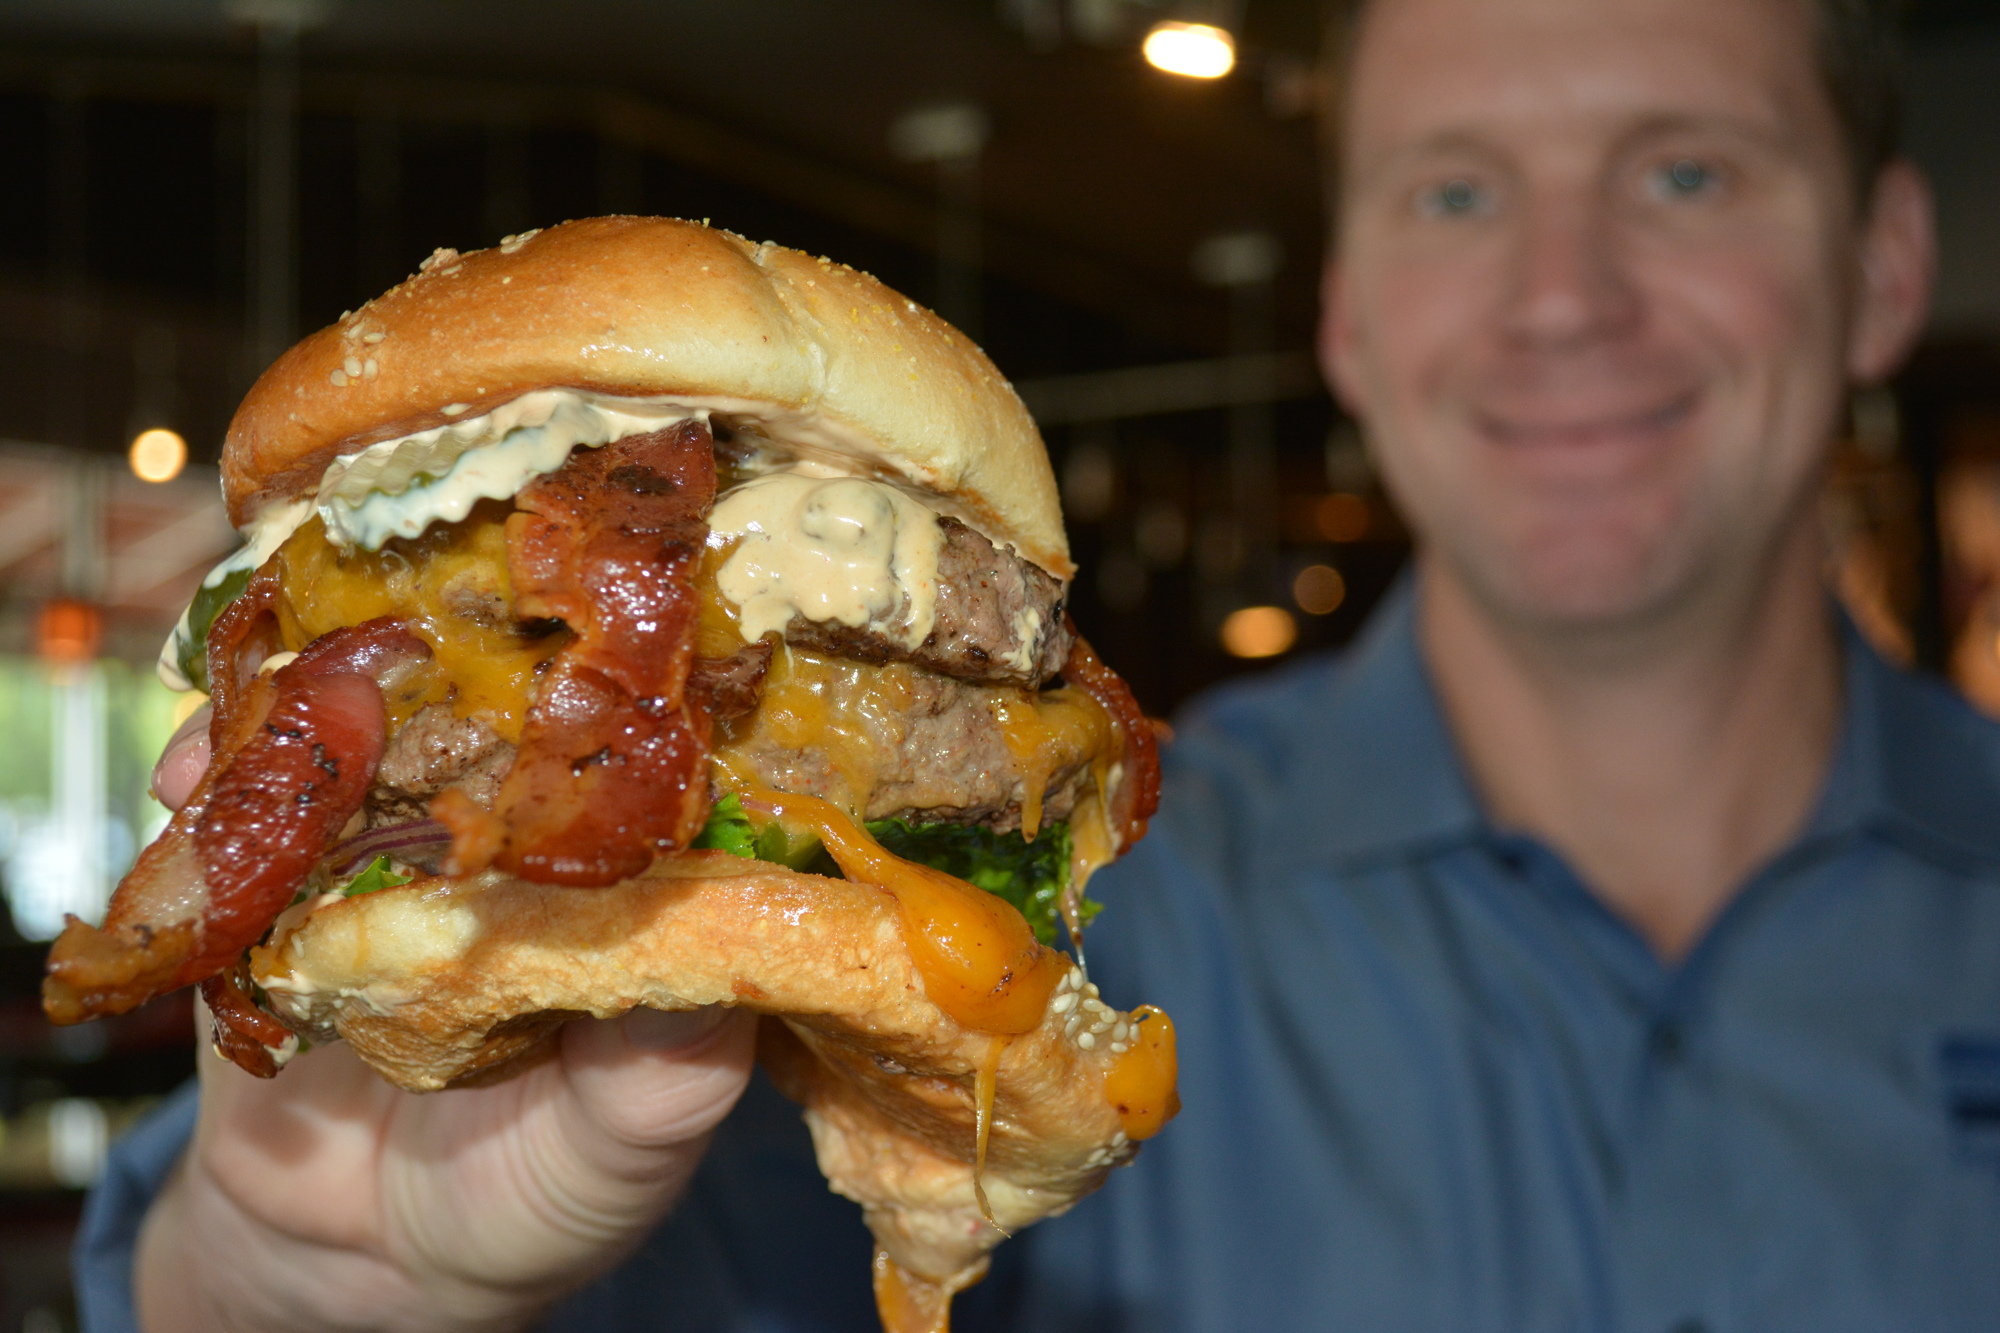 Bill Milner, the vice president of operations at Square 1 Burgers & Bar, shows off a Double Bacon Boomer Sooner.